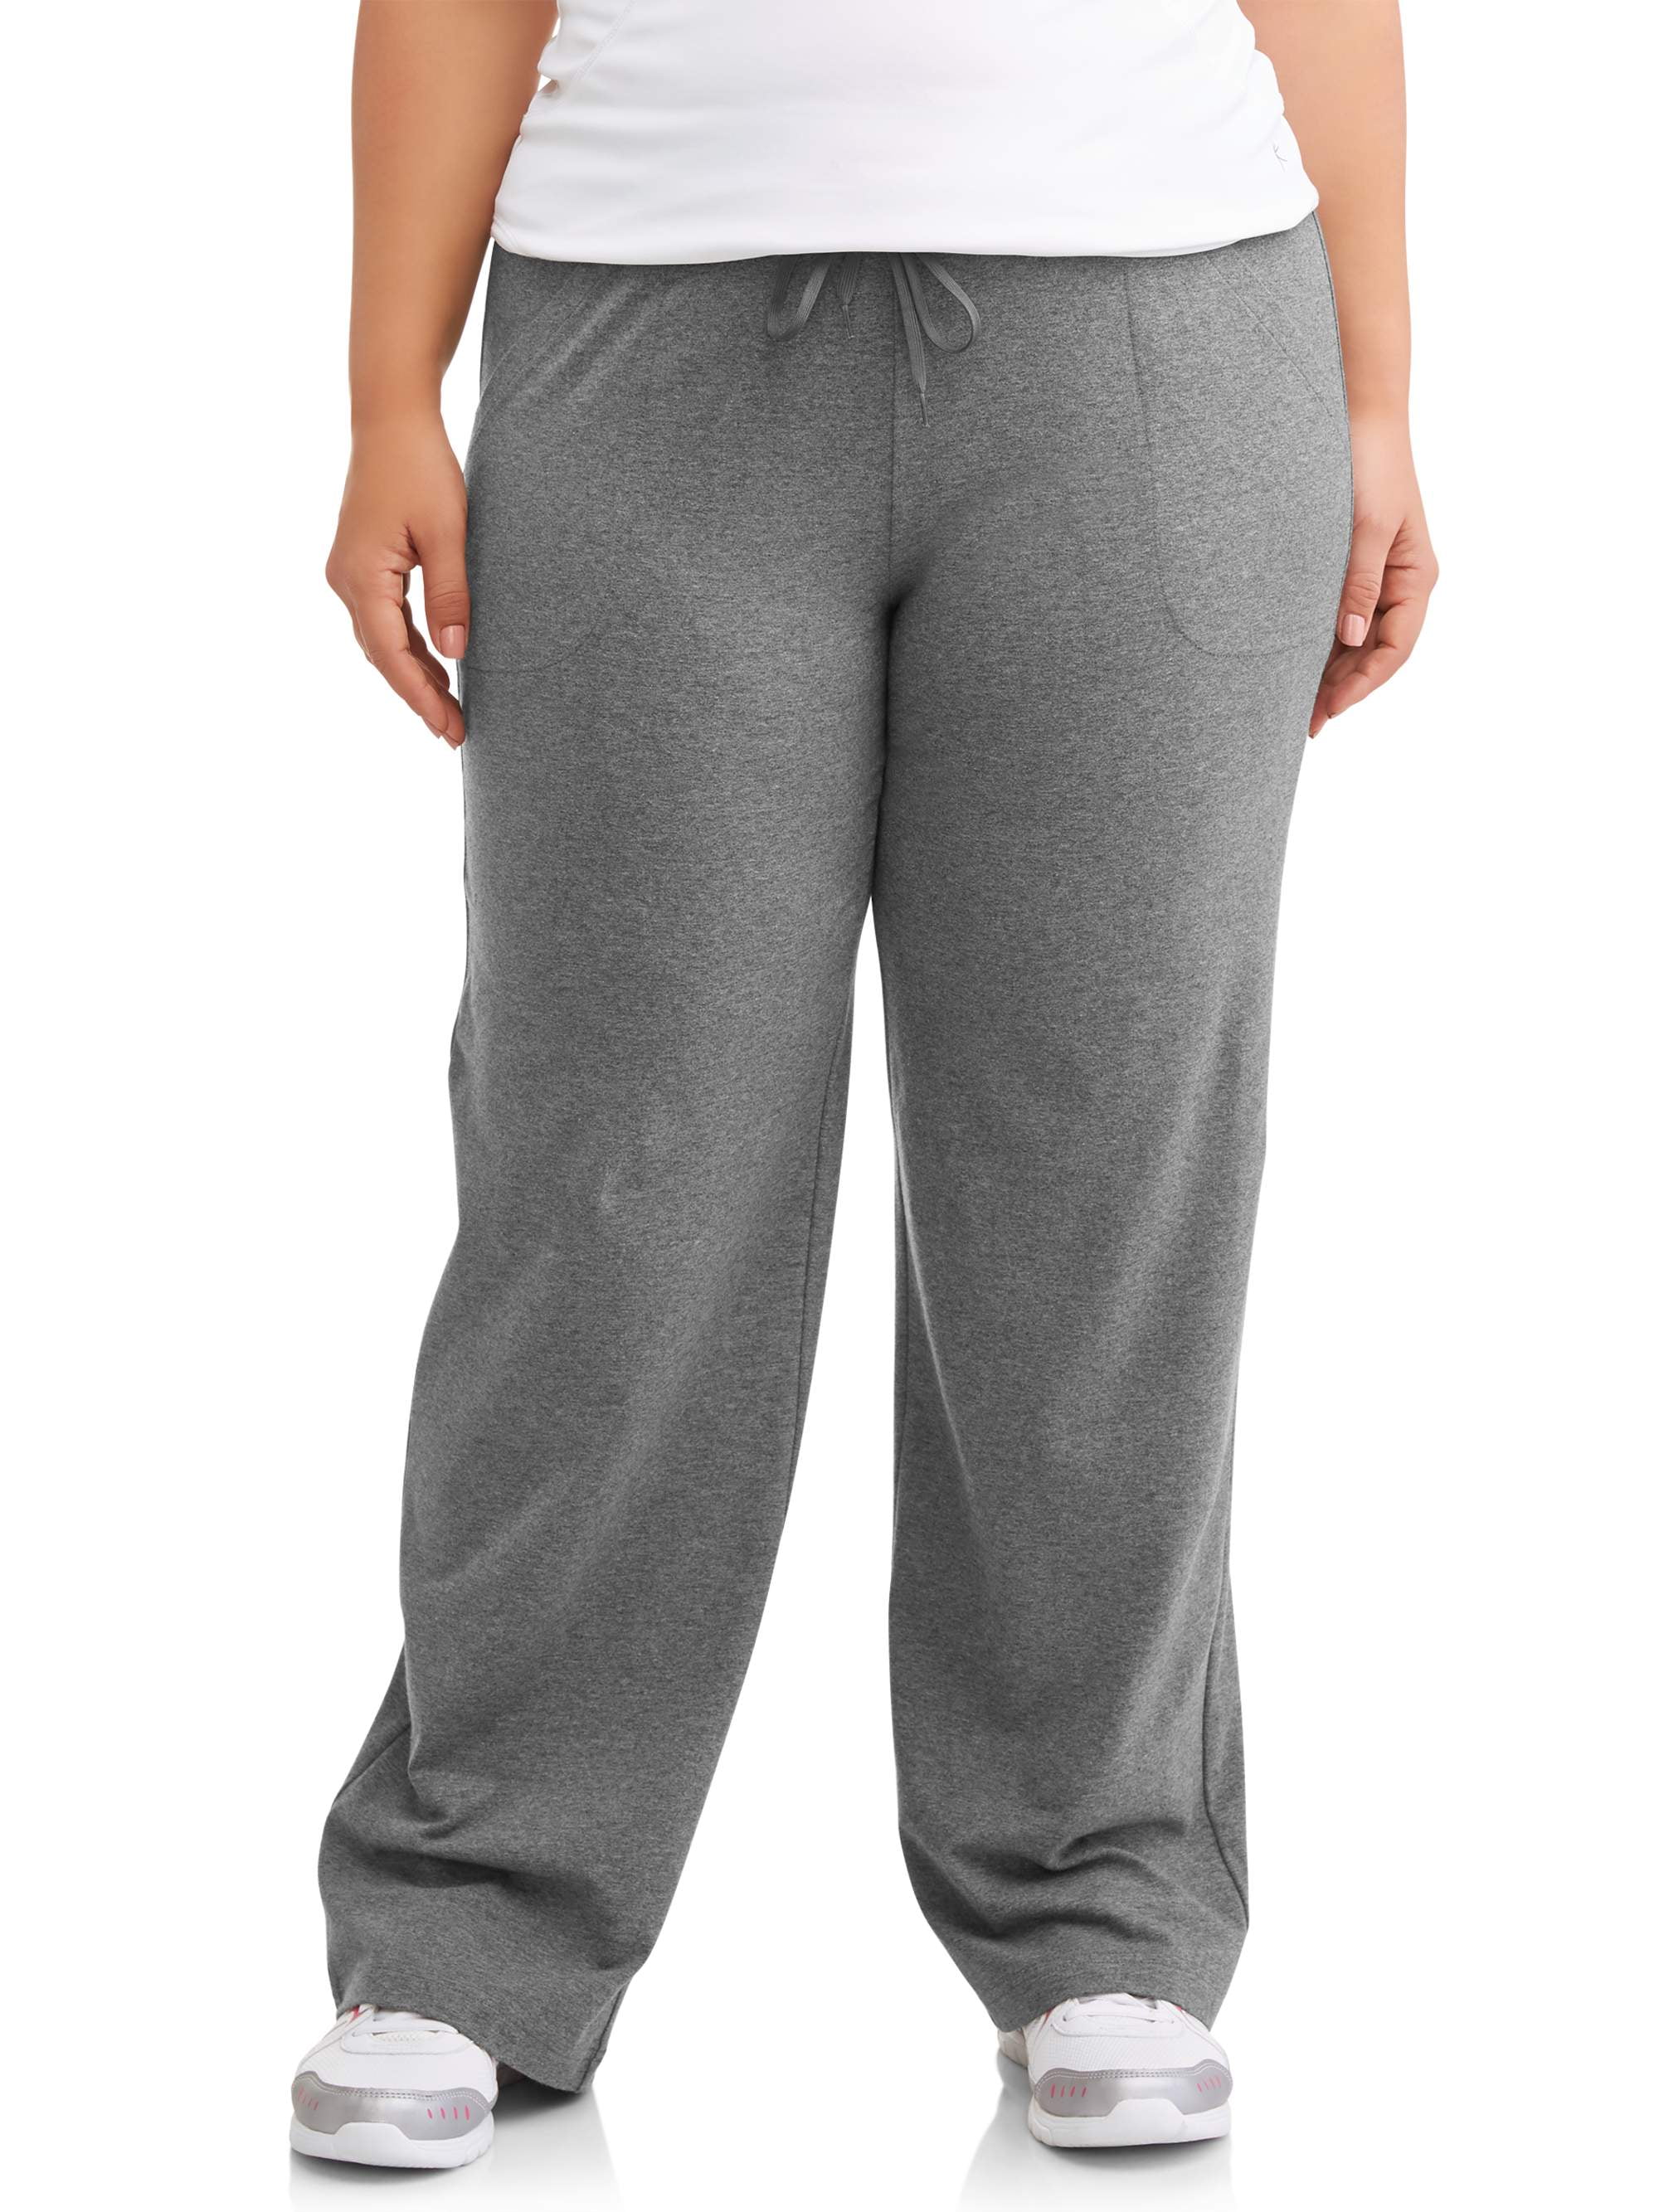 Athletic Works Women/'s Relaxed Fit Dri-More Core Cotton Blend Yoga Pants Available in Regular and Petite